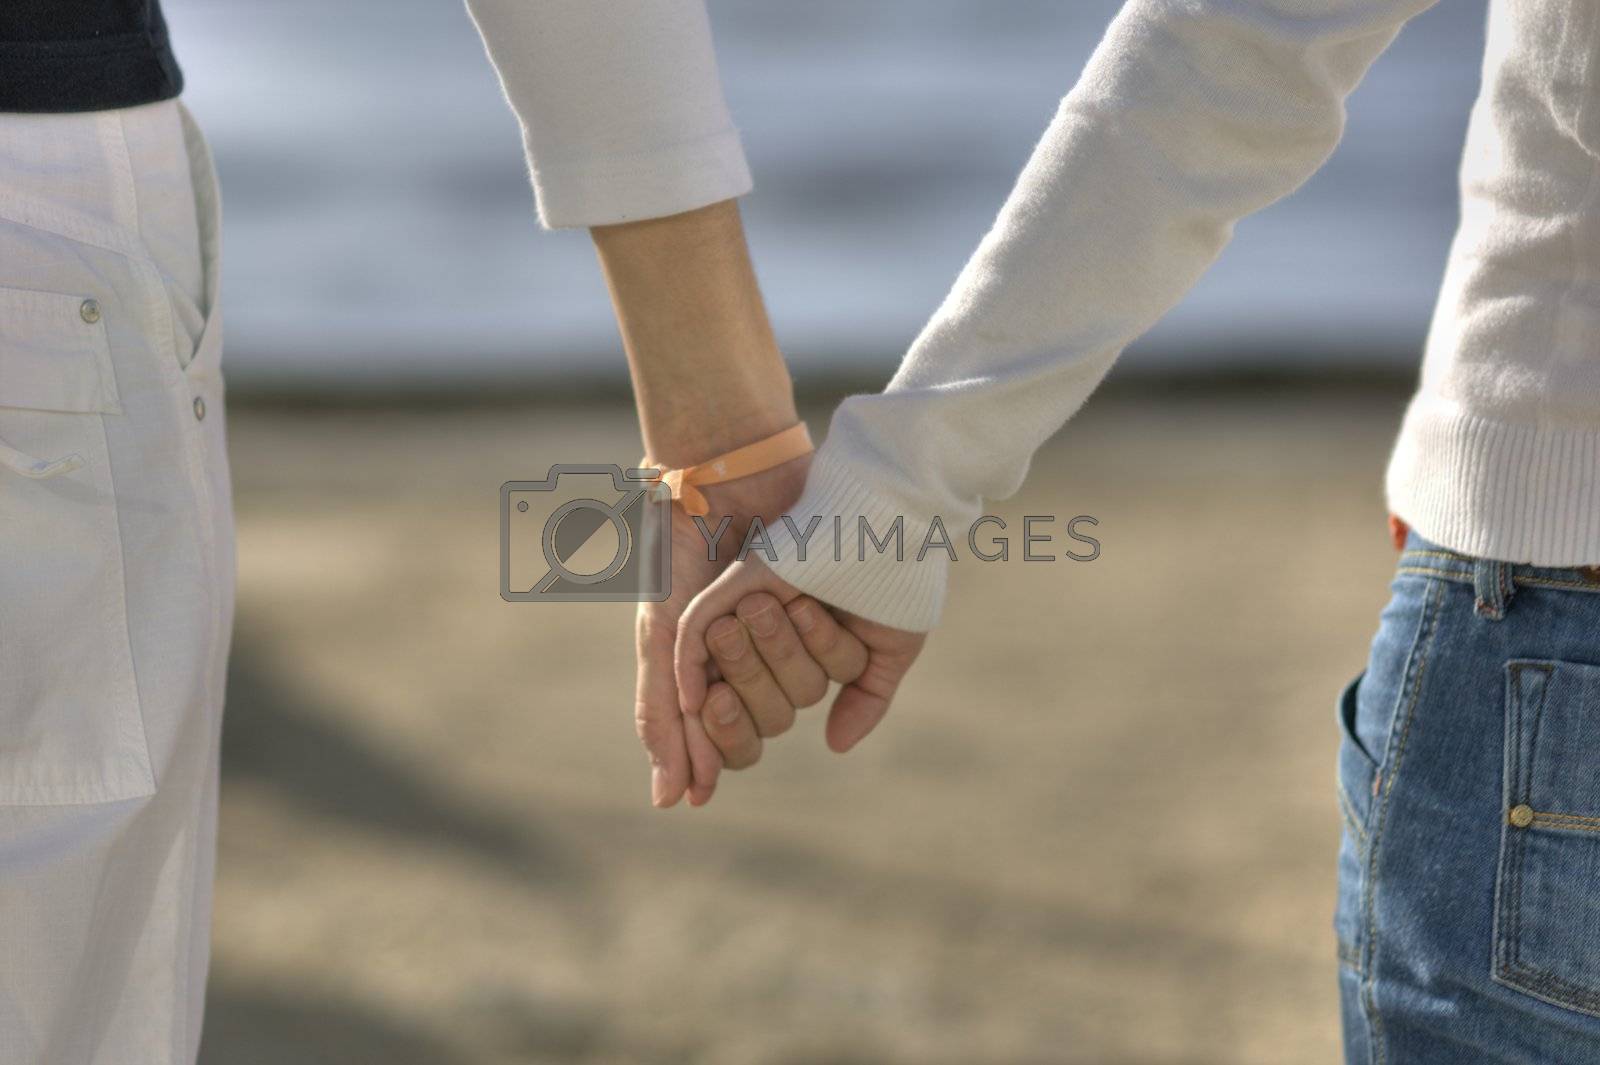 Royalty free image of Love couple by swimnews